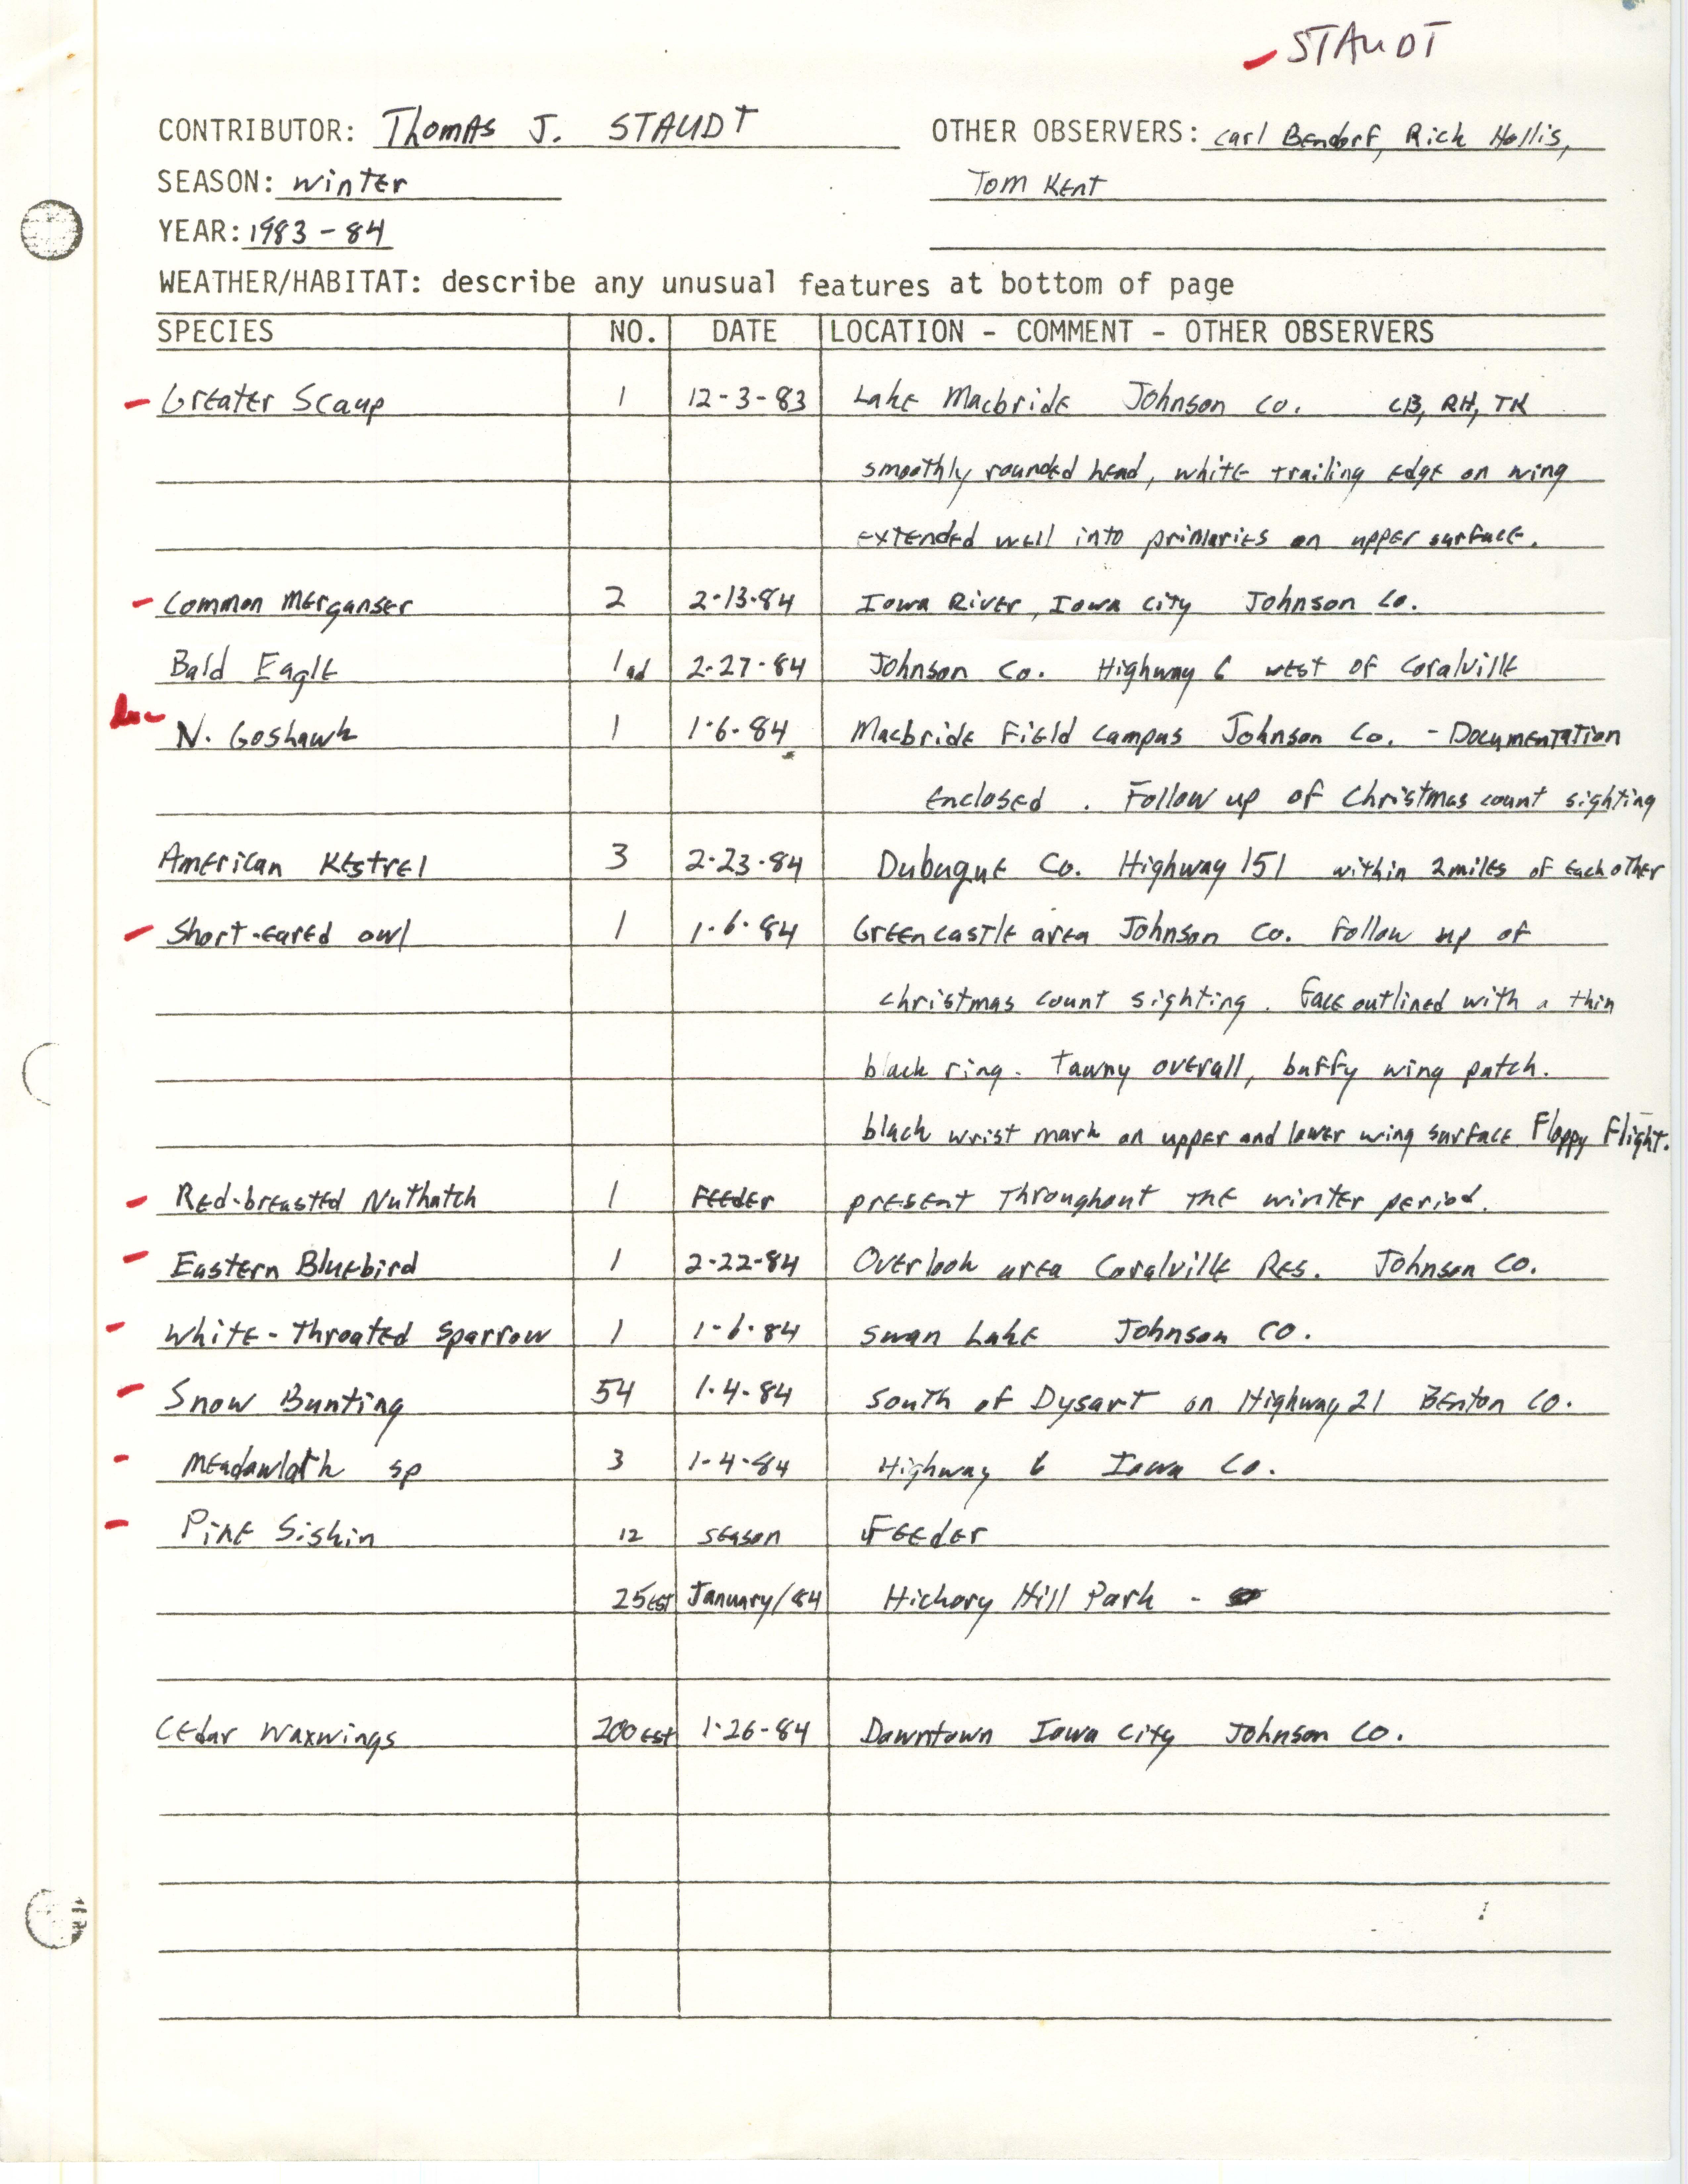 Field notes contributed by Thomas J. Staudt, winter 1983-1984